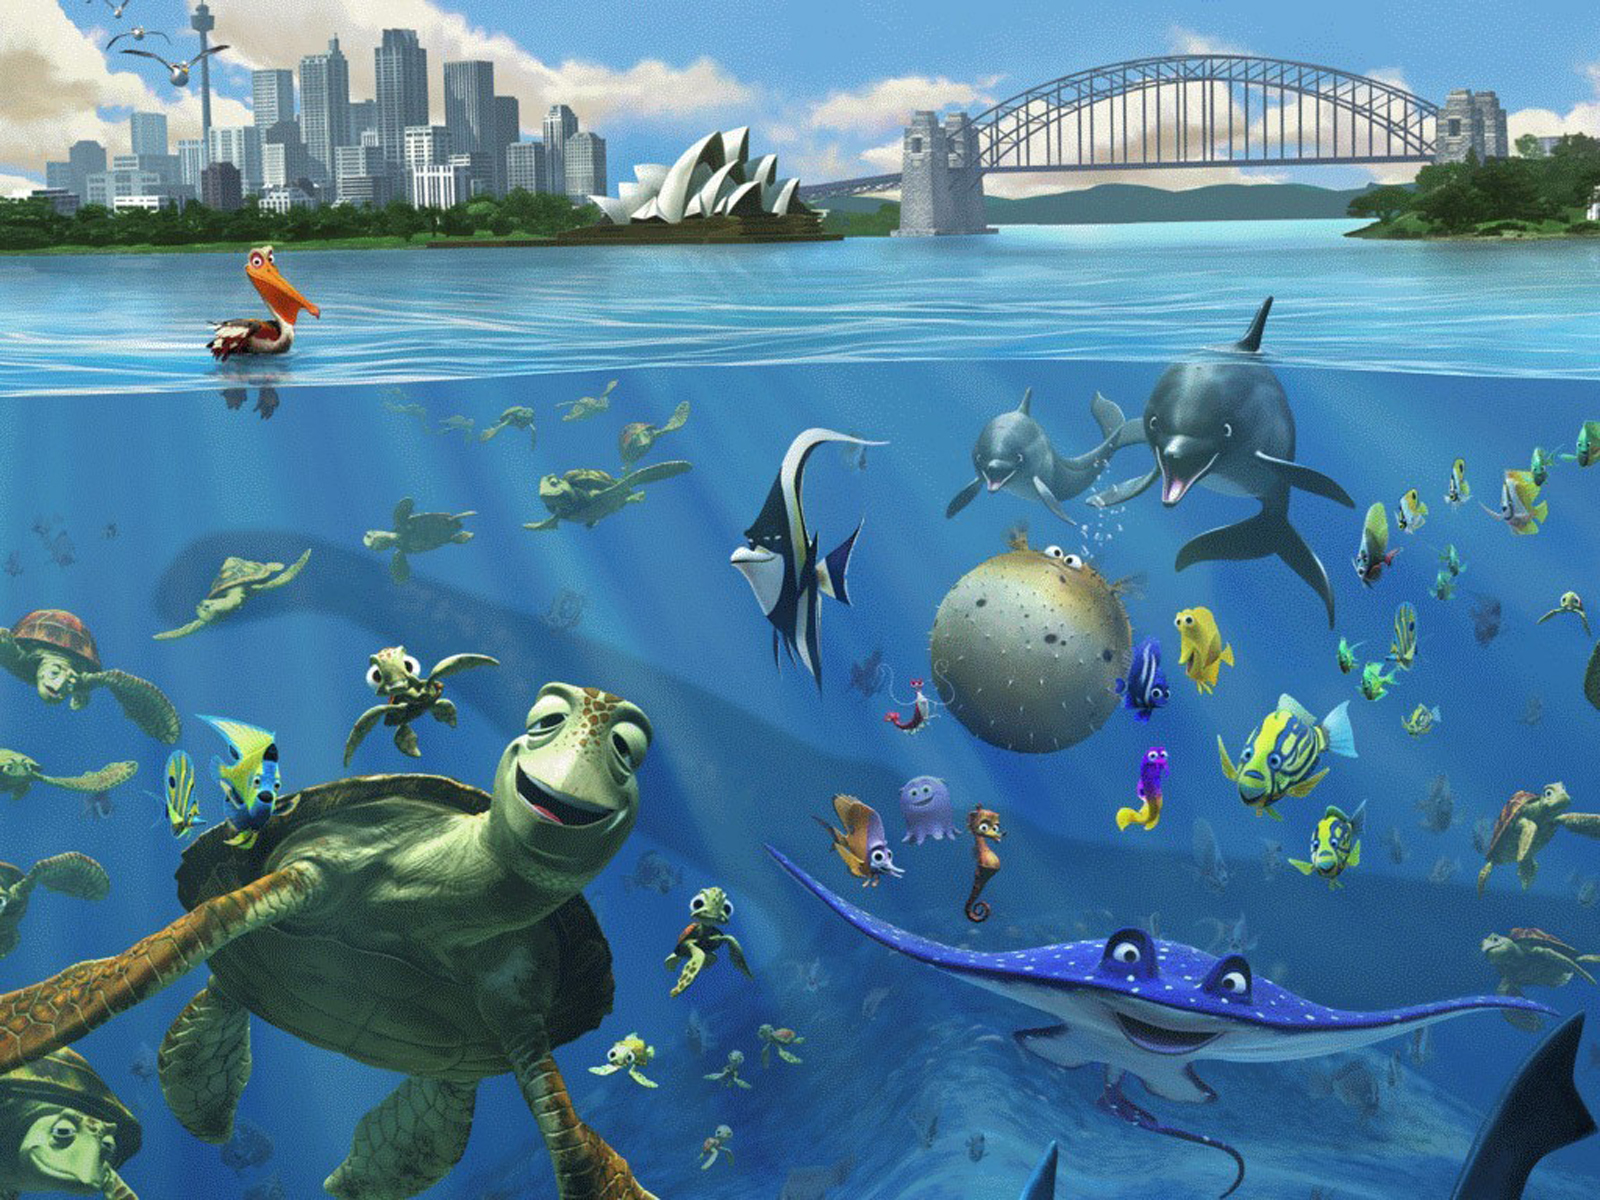 Finding Nemo 3d Movie Poster HD Wallpaper High Resolution Background